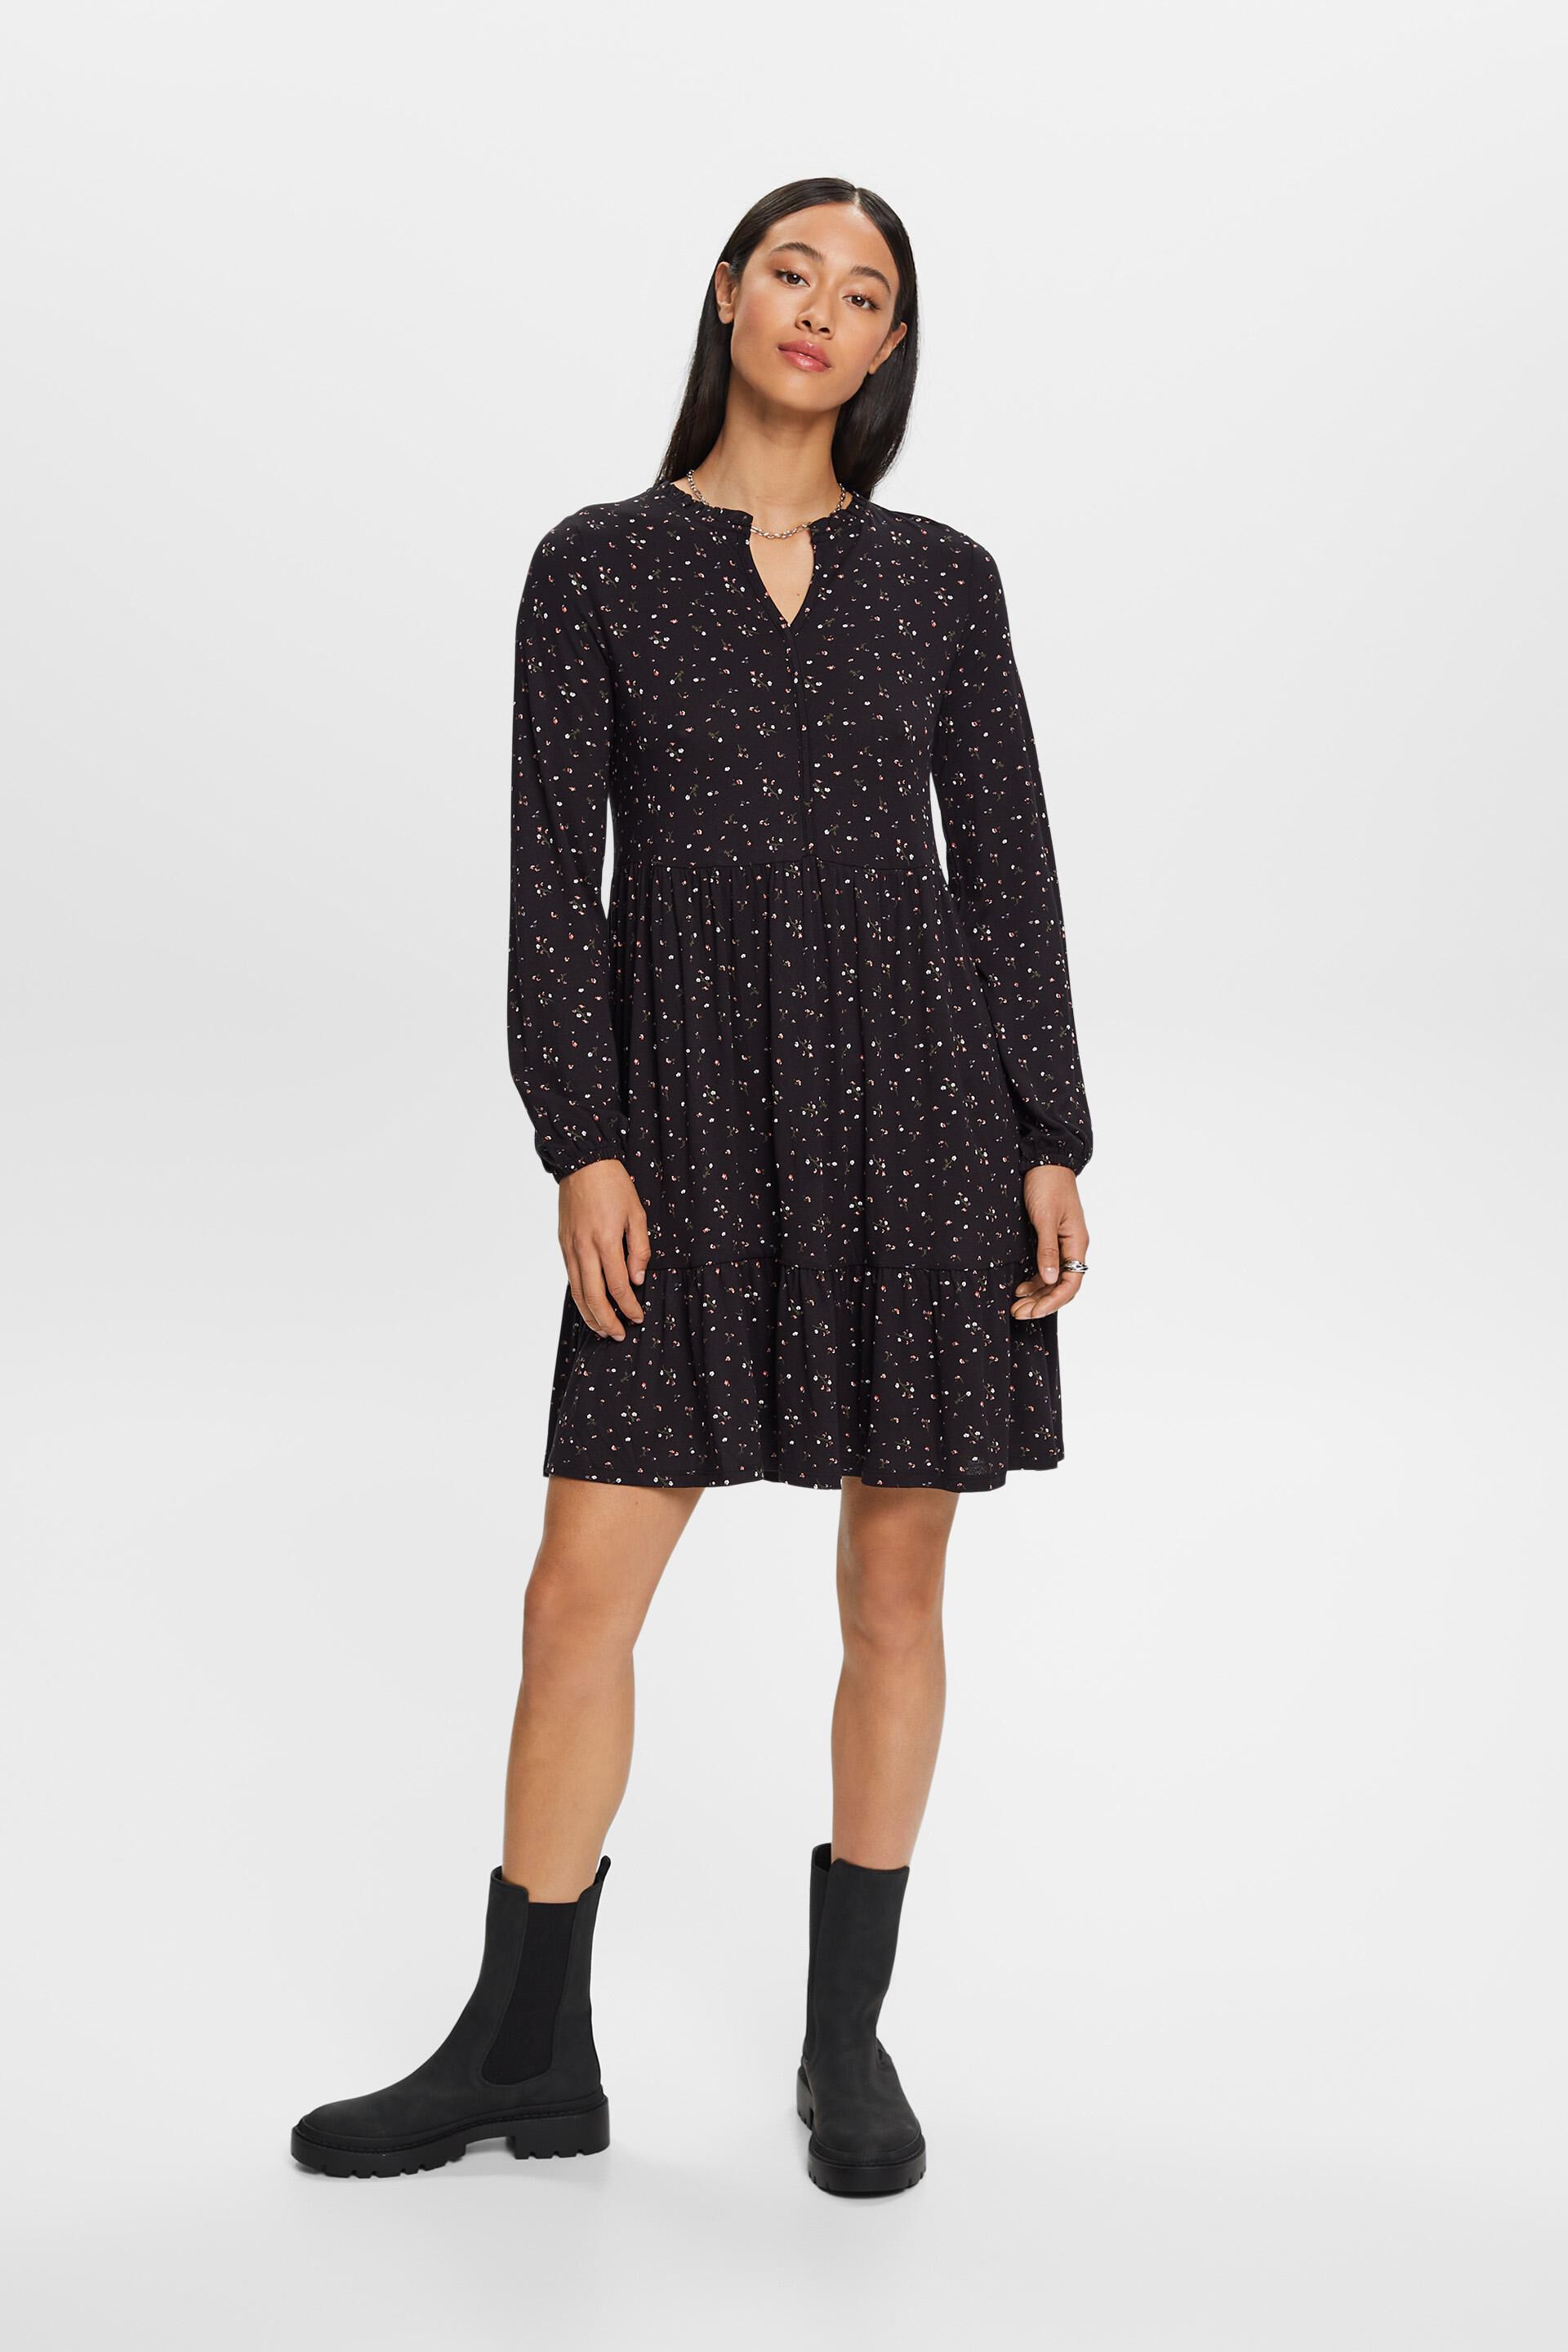 Esprit knitted Dresses